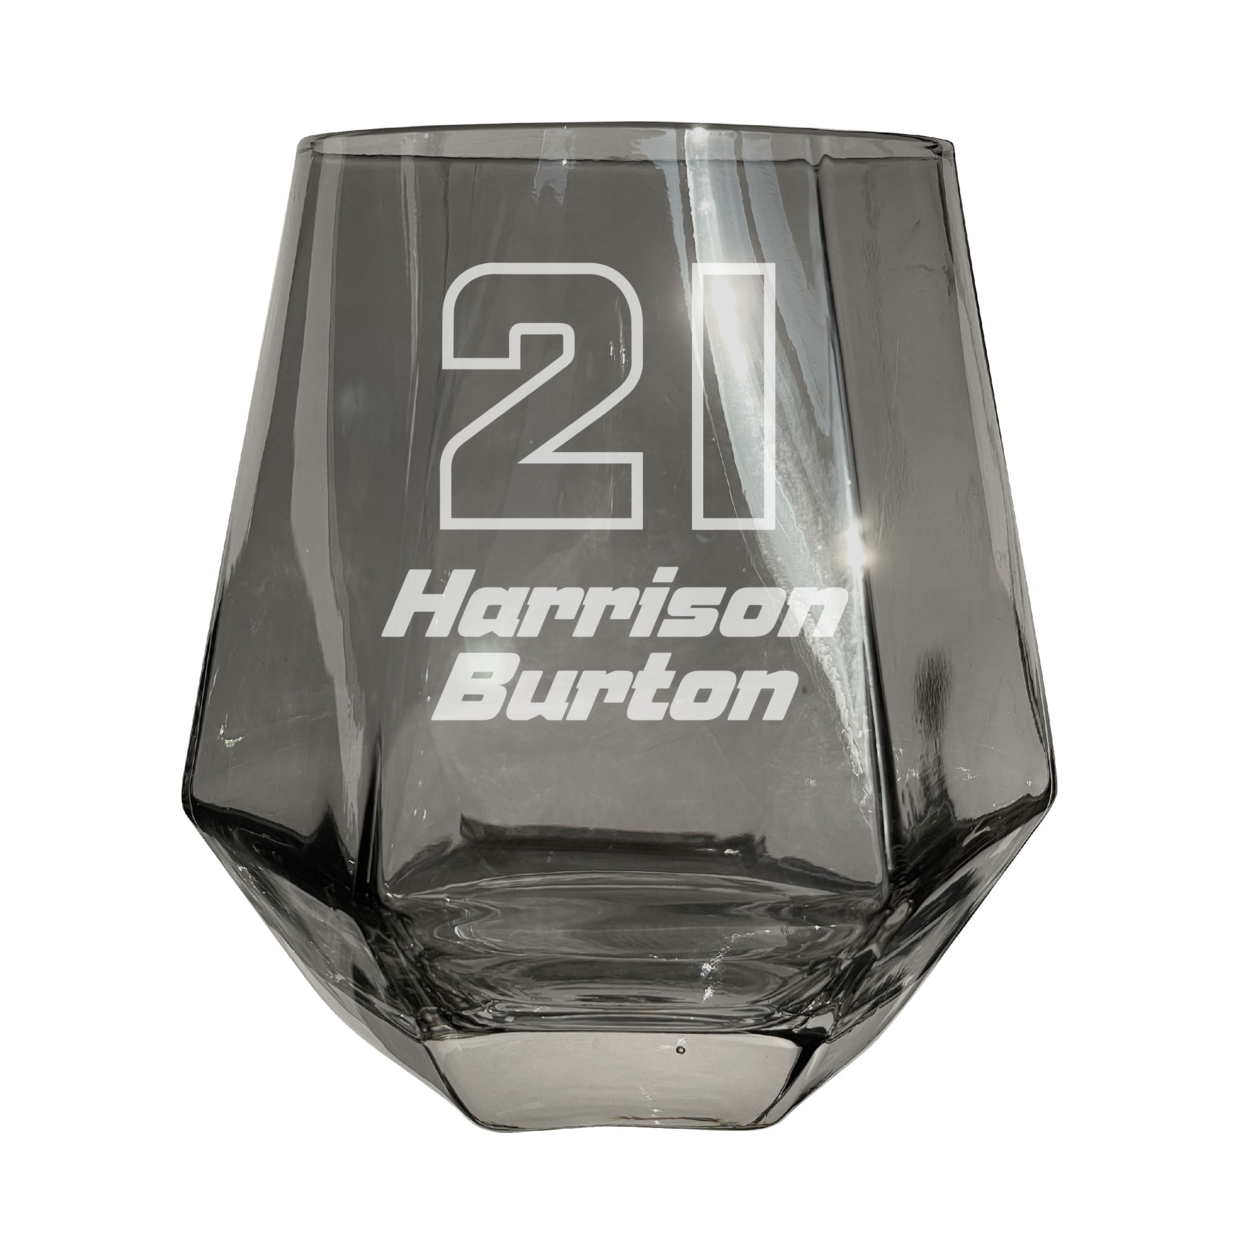 #21 Harrison Burton Officially Licensed 10 Oz Engraved Diamond Wine Glass - Clear, 2-Pack